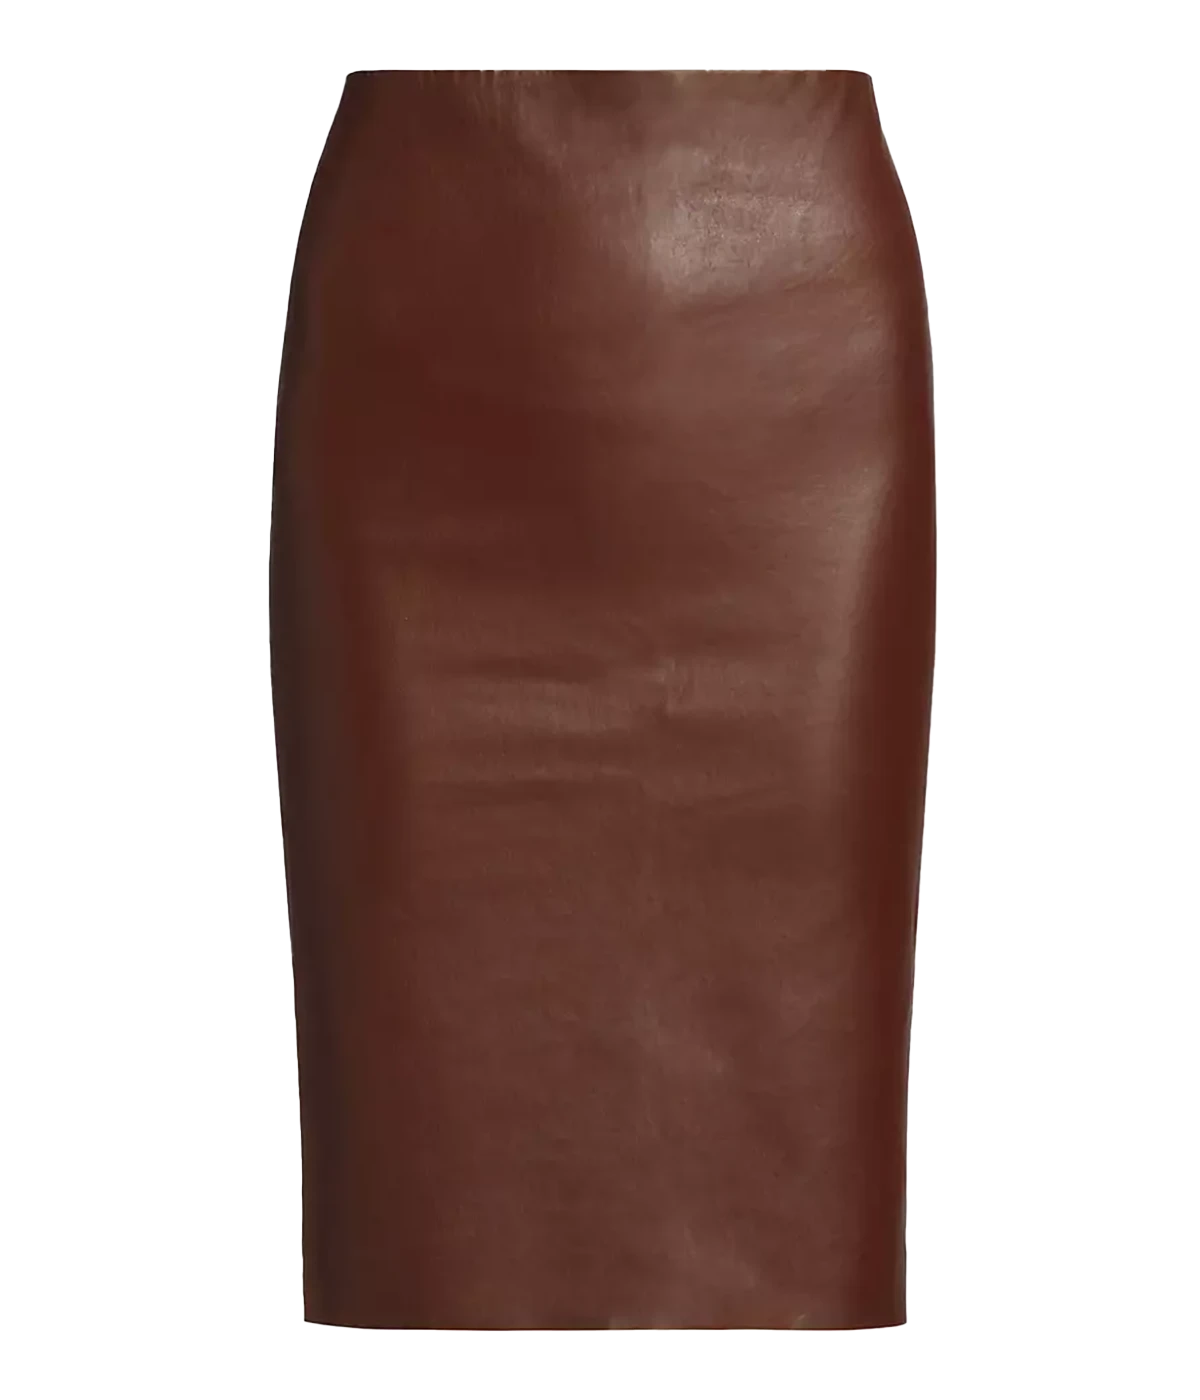 midi length whiskey brown real leather skirt, perfect for nights outor corporate wear. 